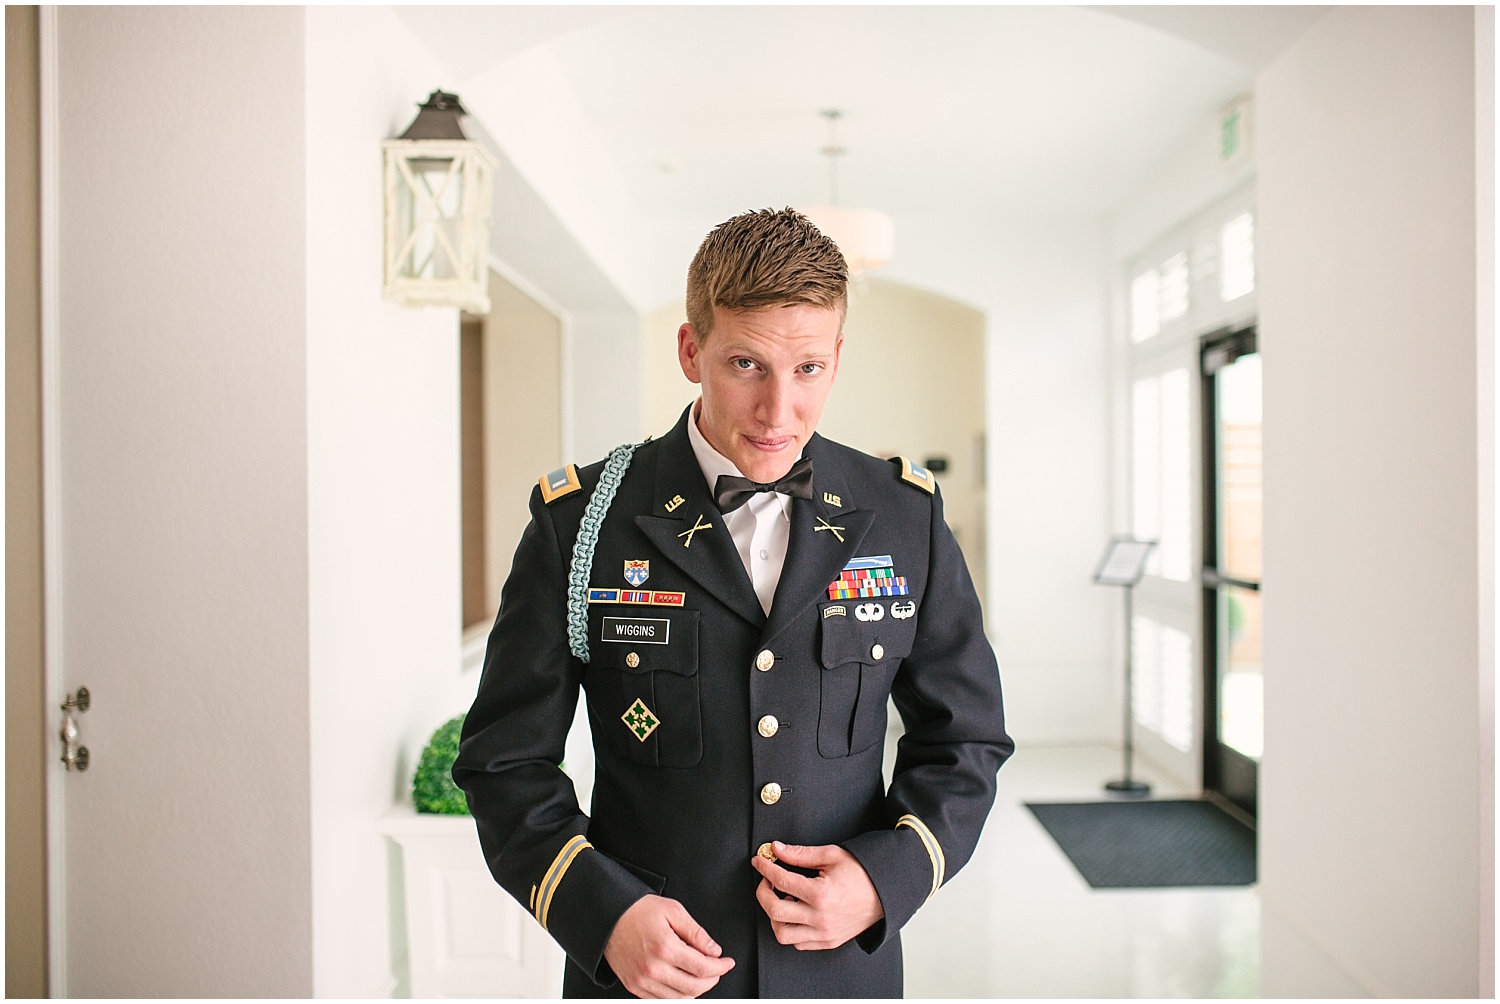 Groom wearing Army dress blues uniform for wedding at Creekside Event Center in Colorado Springs